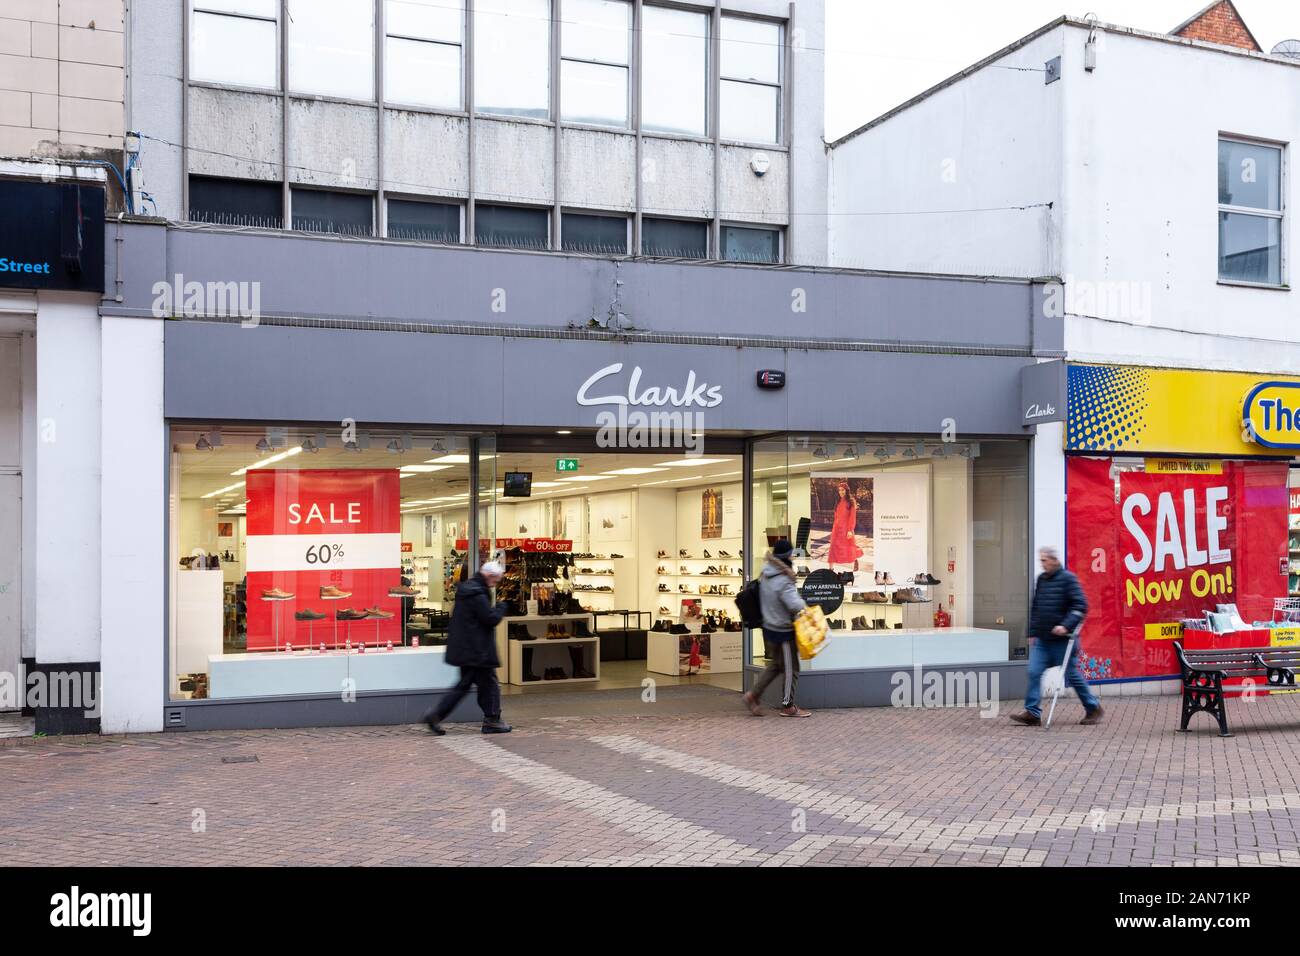 Clarks Shoes Sign High Resolution Stock 